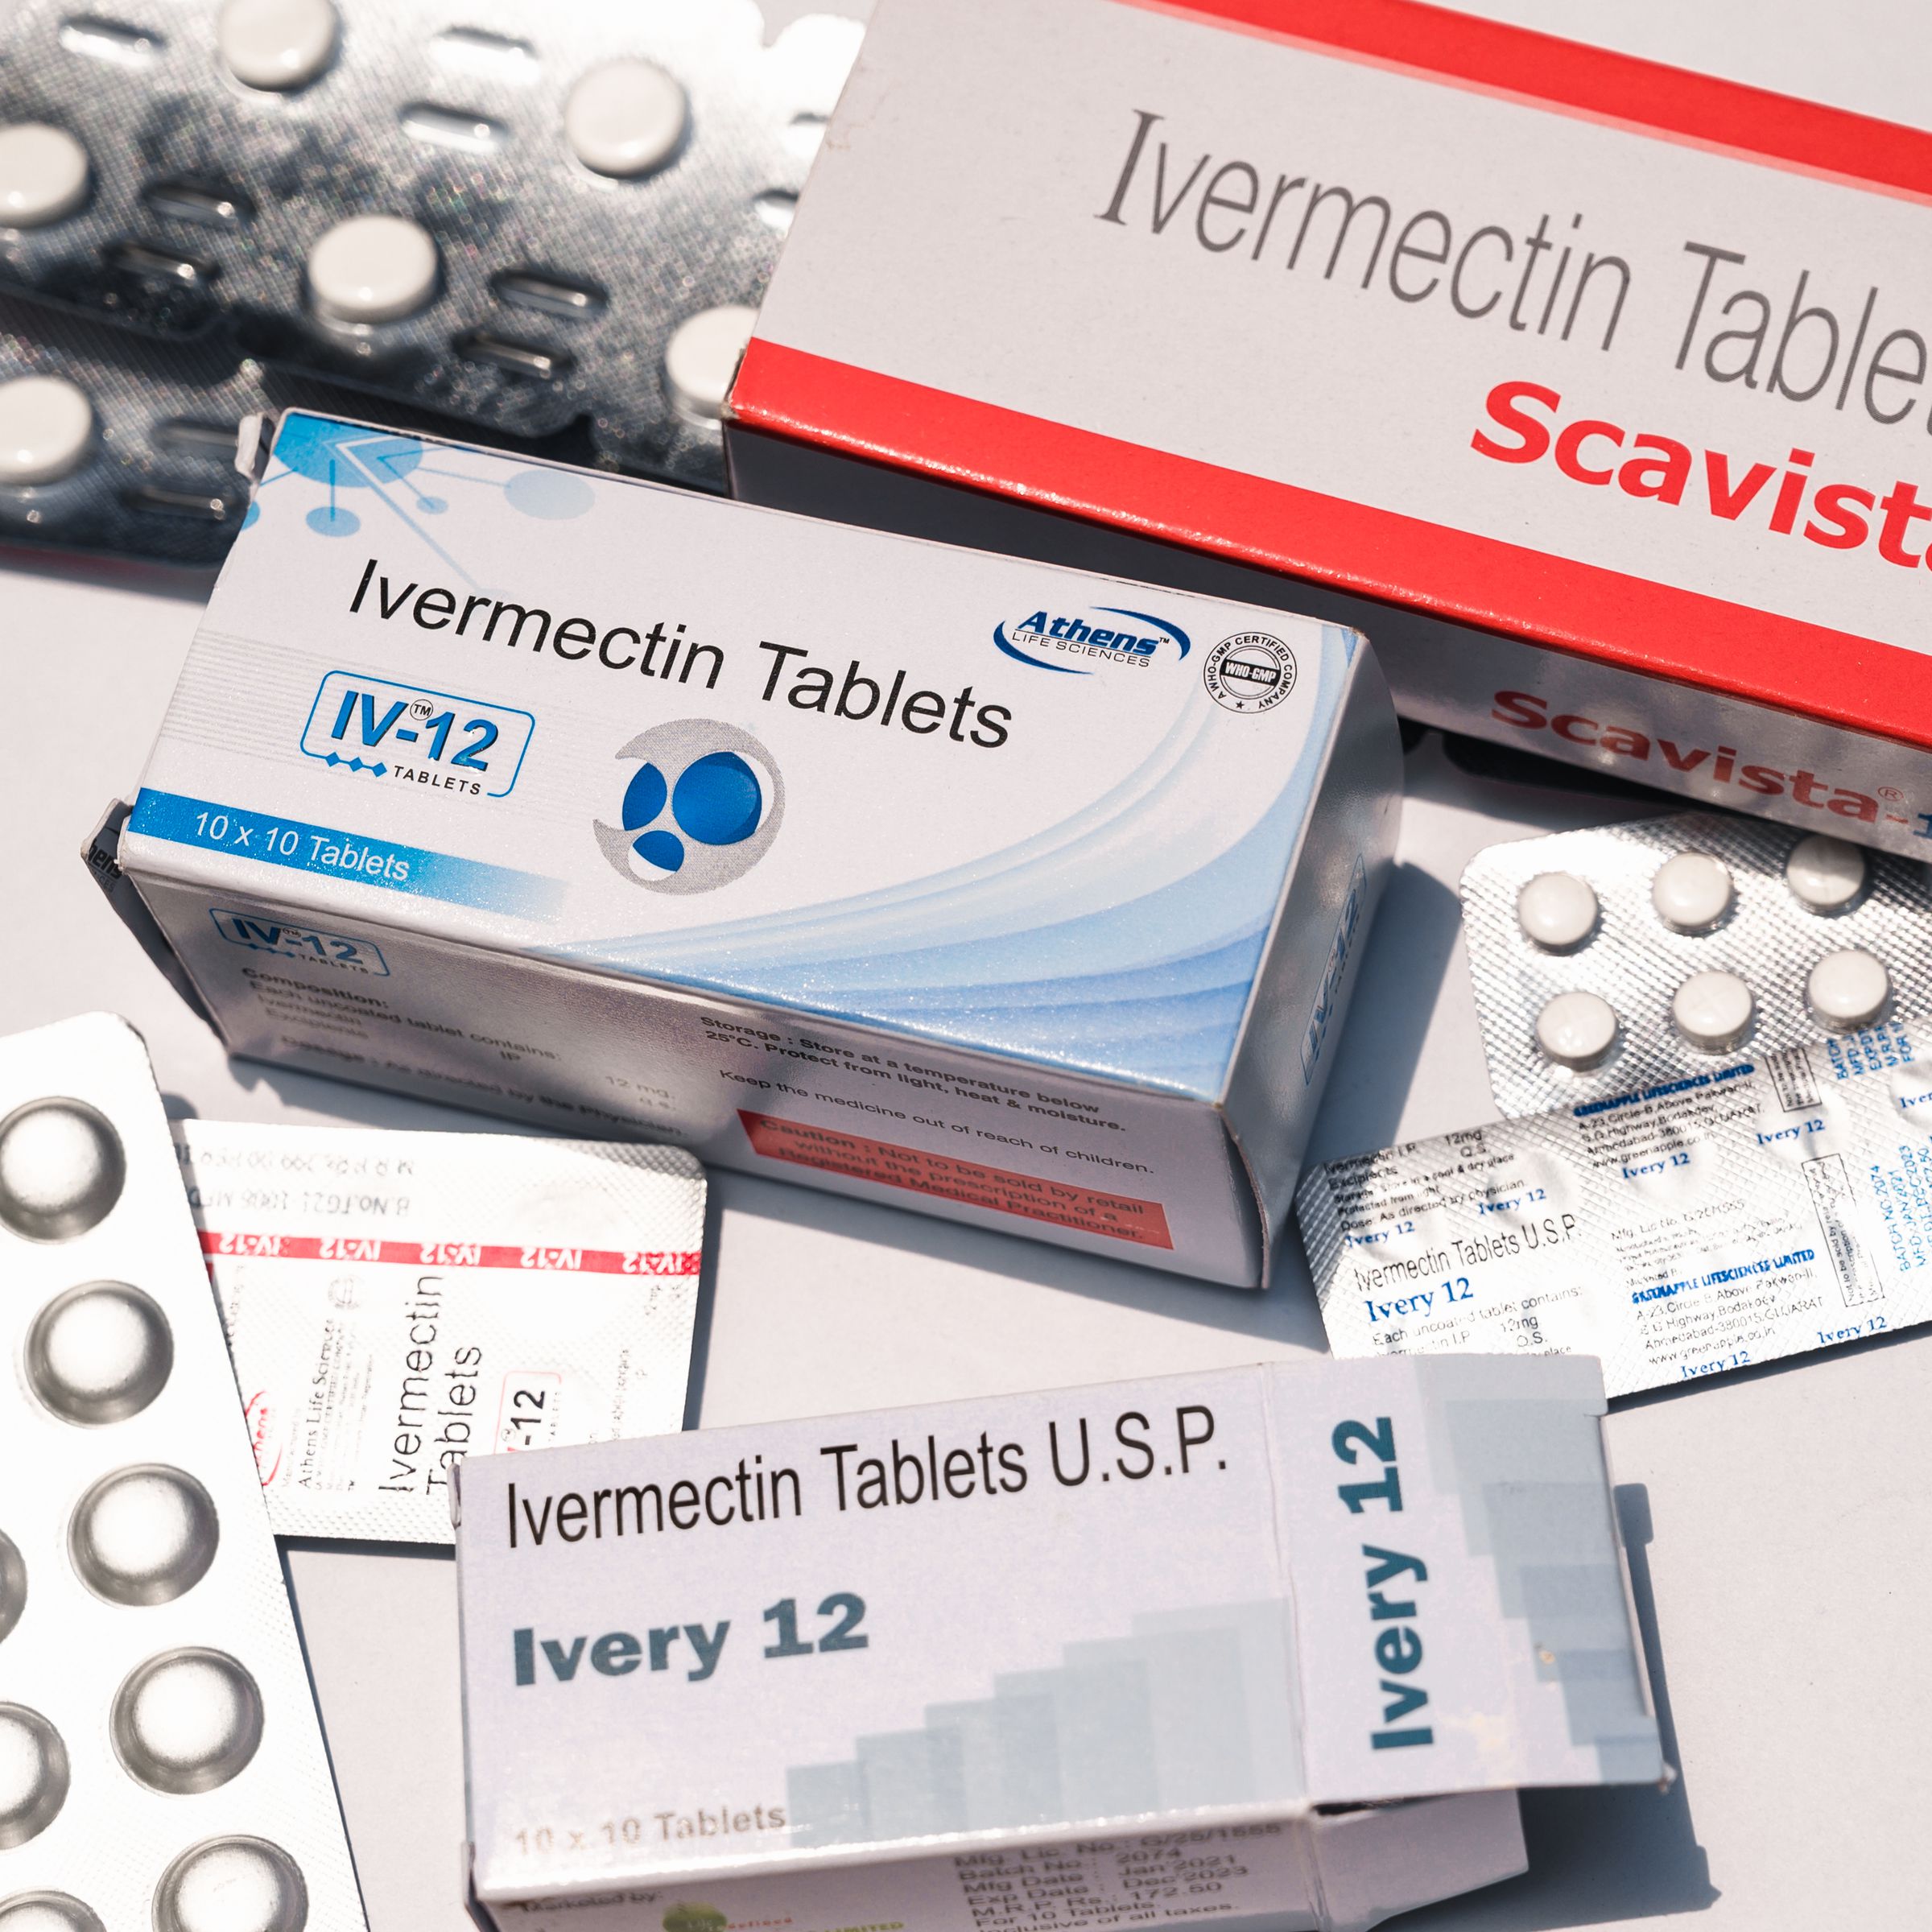 An assortment of boxes and blister packs of ivermectin.